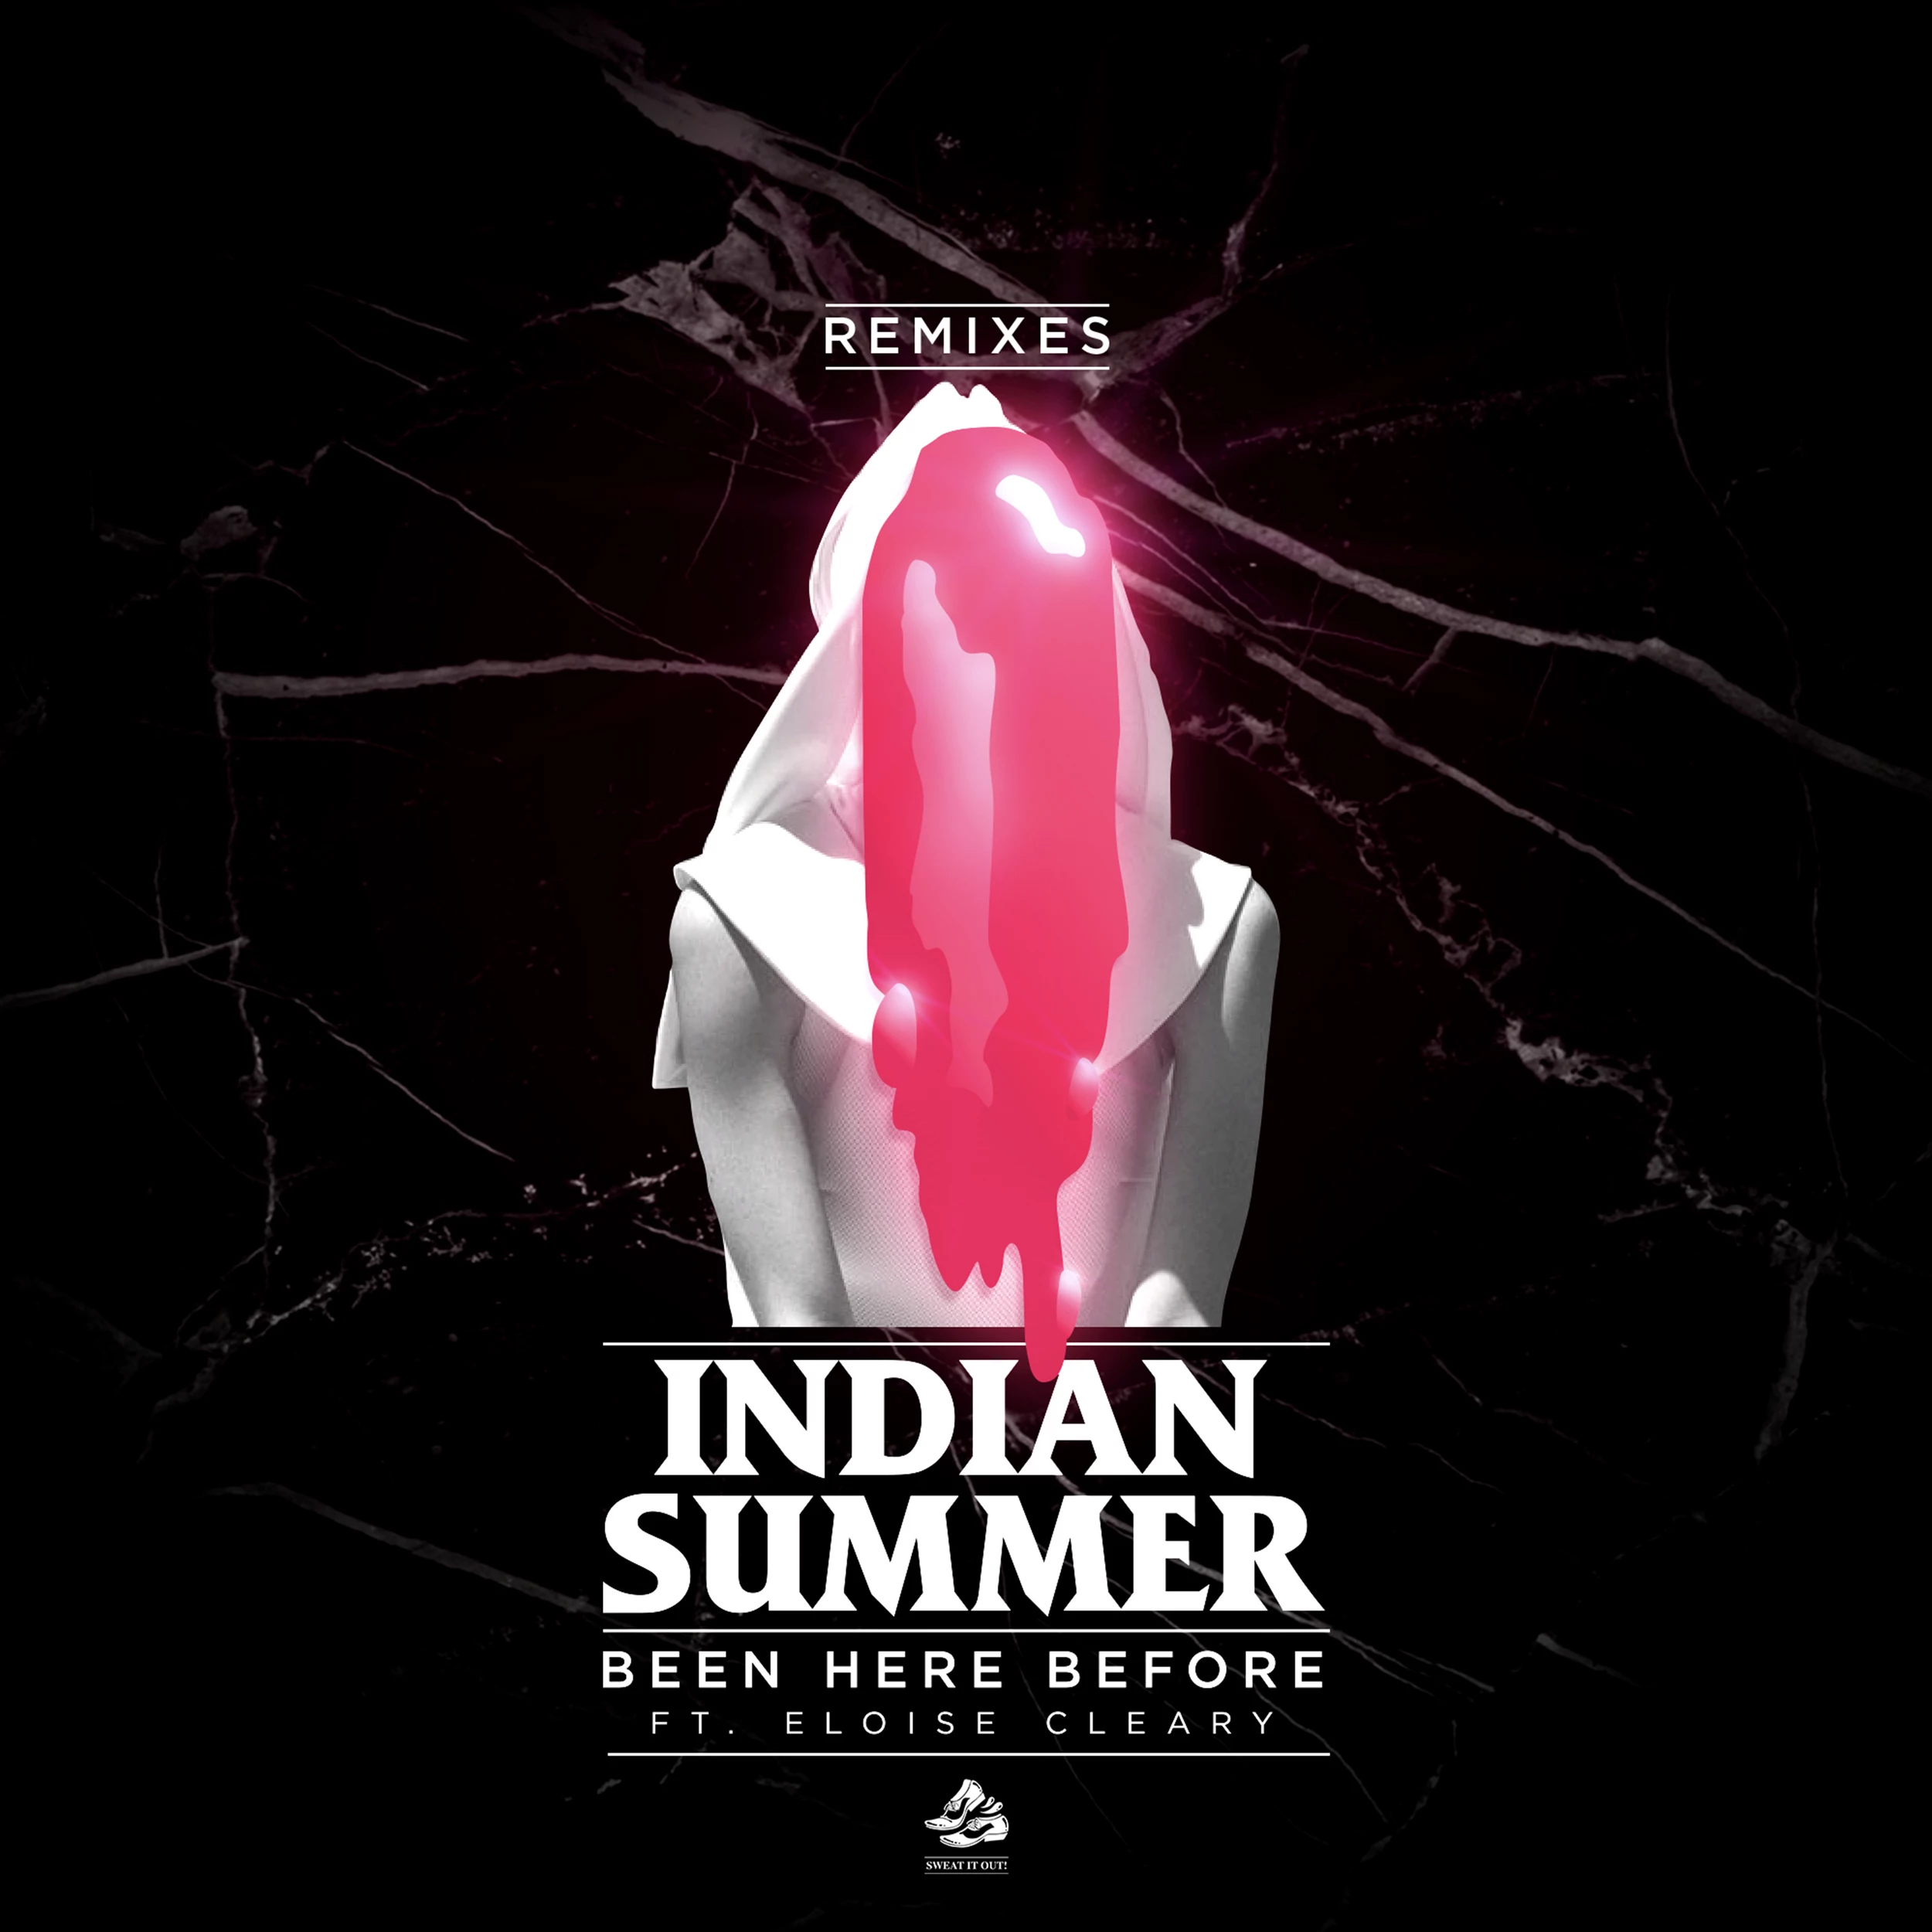 Treasure Fingers Releases New Remix of Indian Summer’s “Better
Here Before” Via Sweat It Out